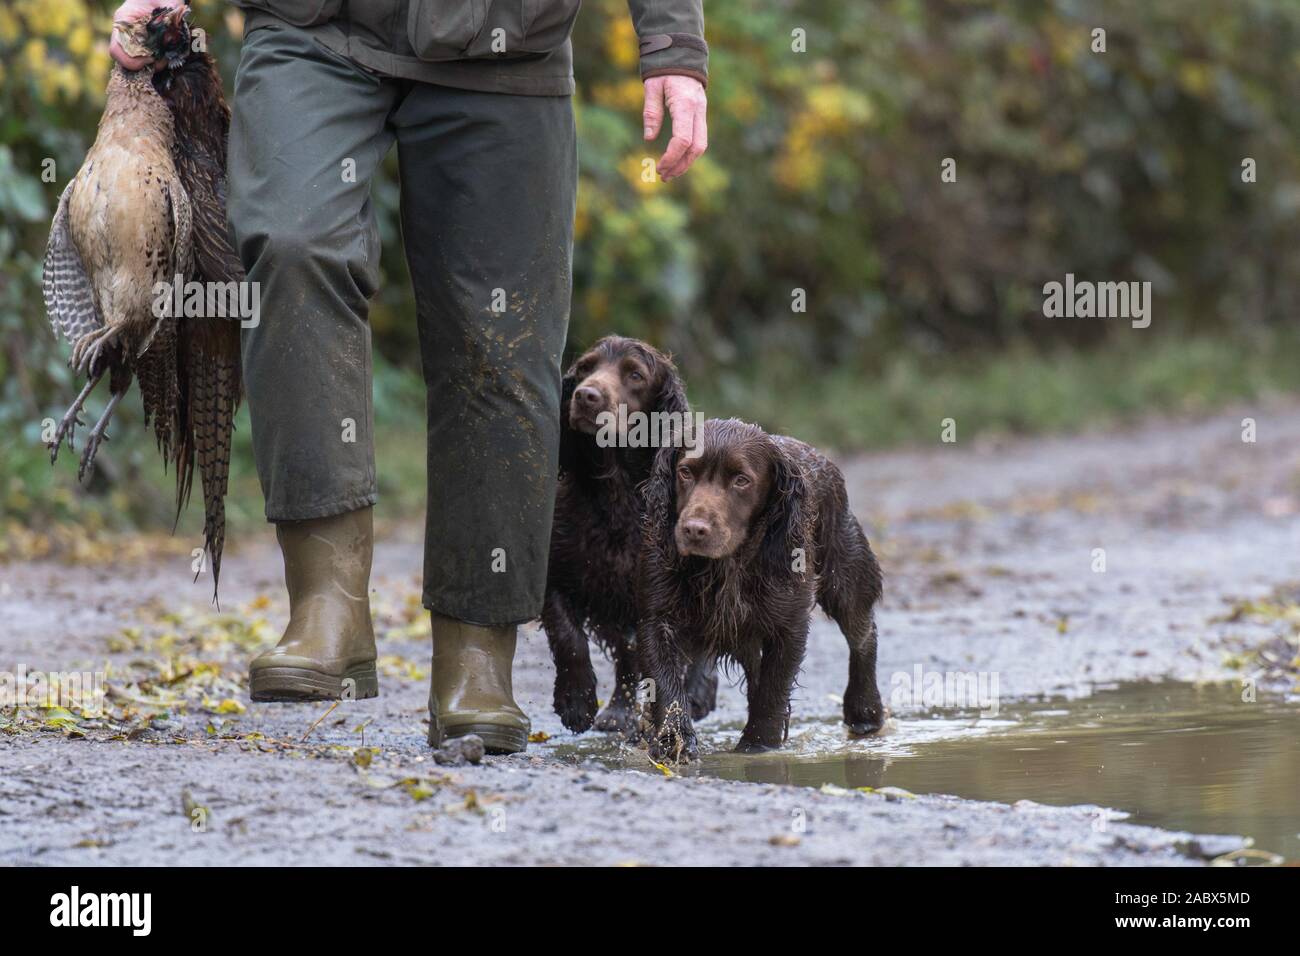 man carrying brace of pheasants with cocker spaniels walking at heel Stock Photo